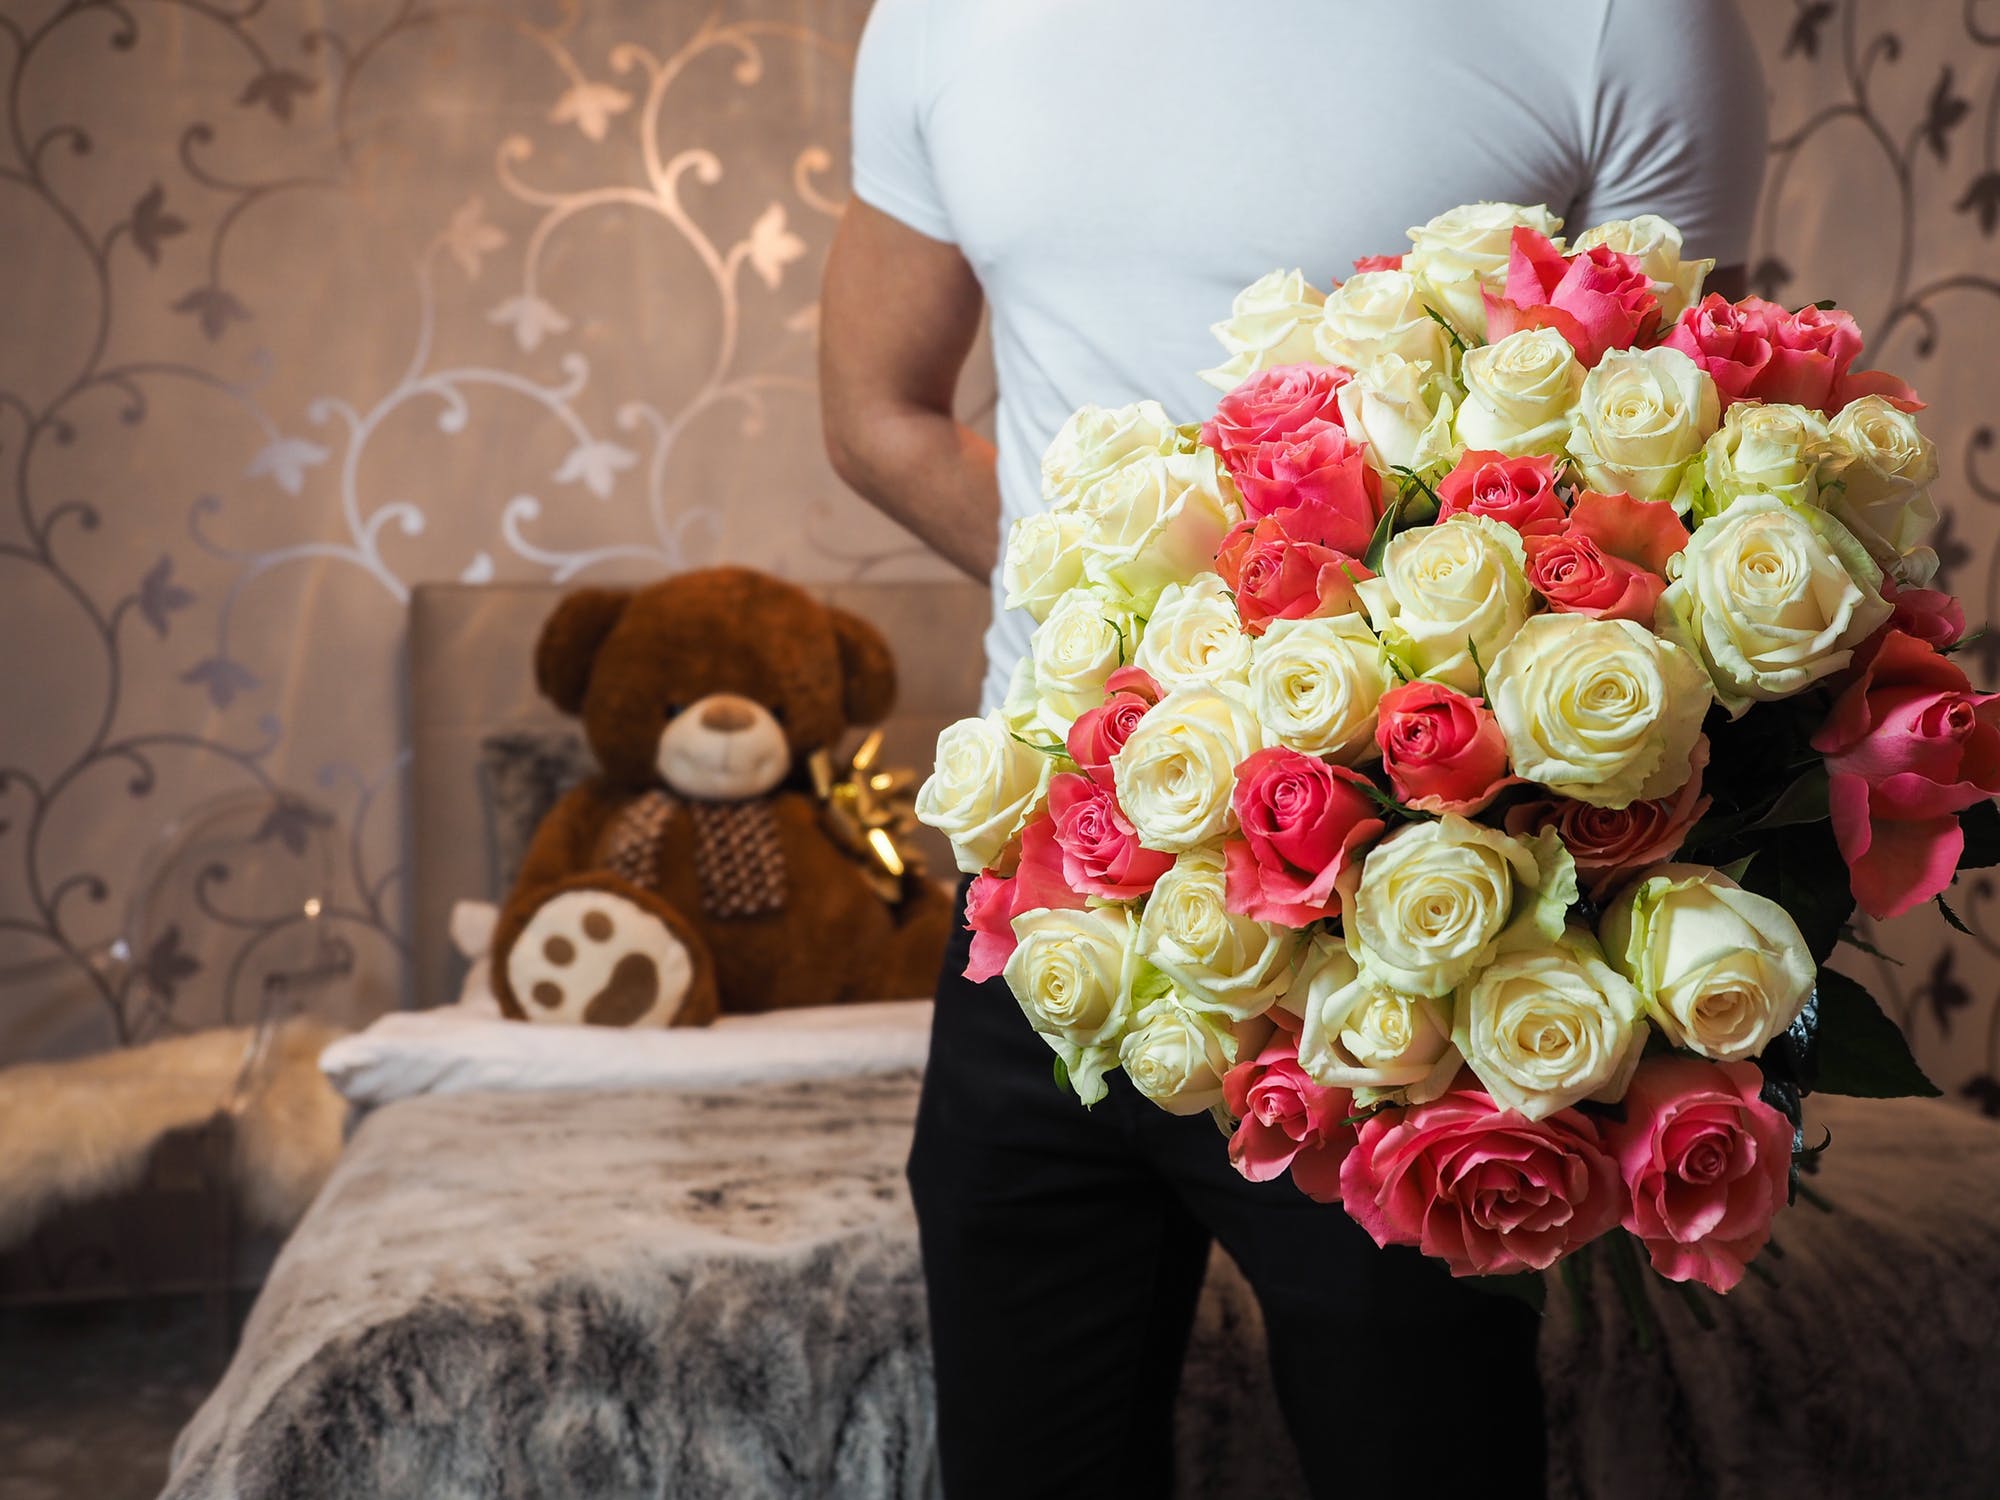 Gifting Flowers to Your Lady Love - Know the Variety